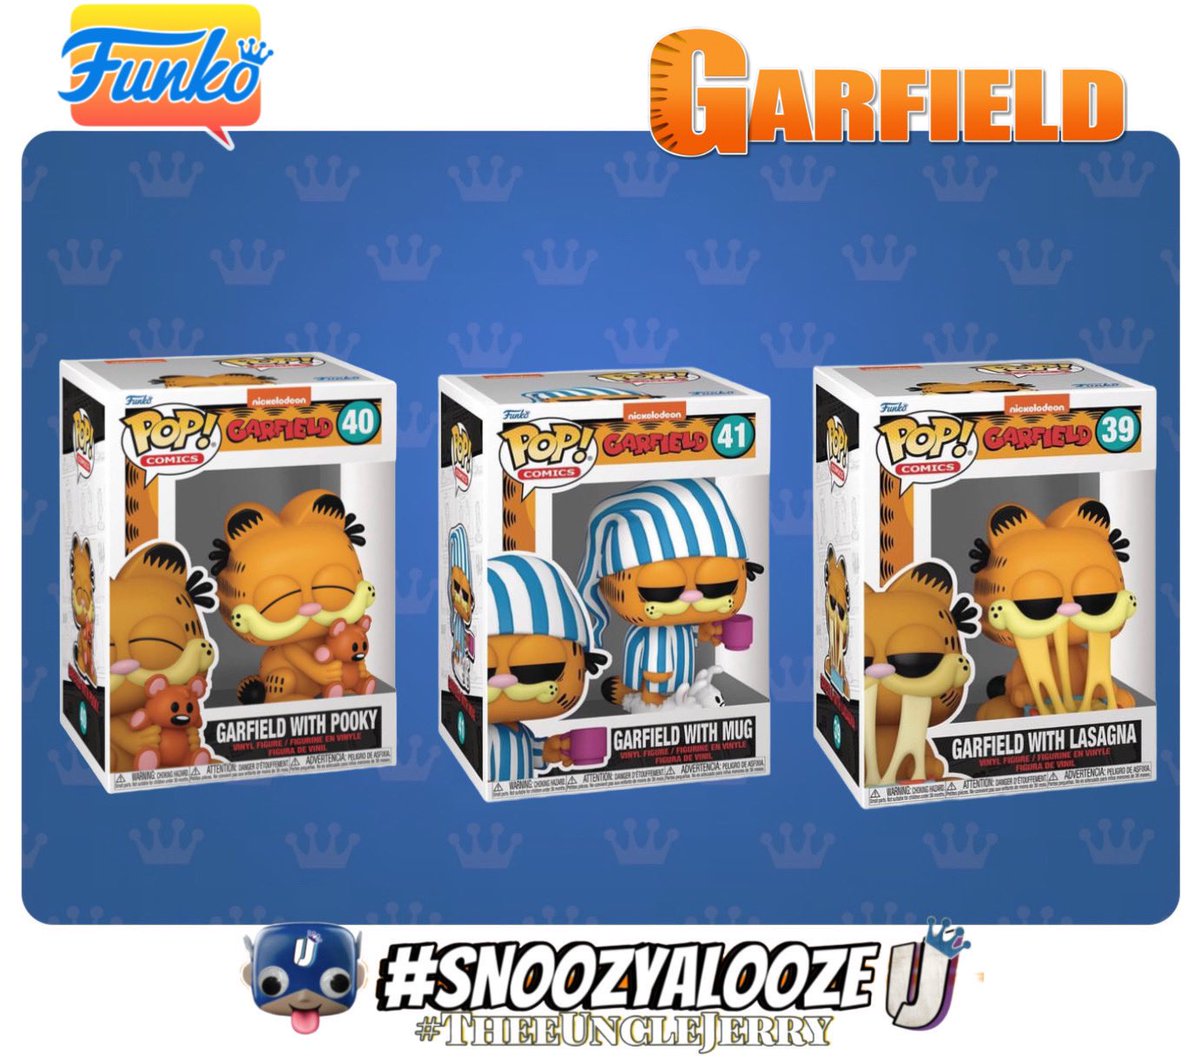 New Garfield wave on the way!